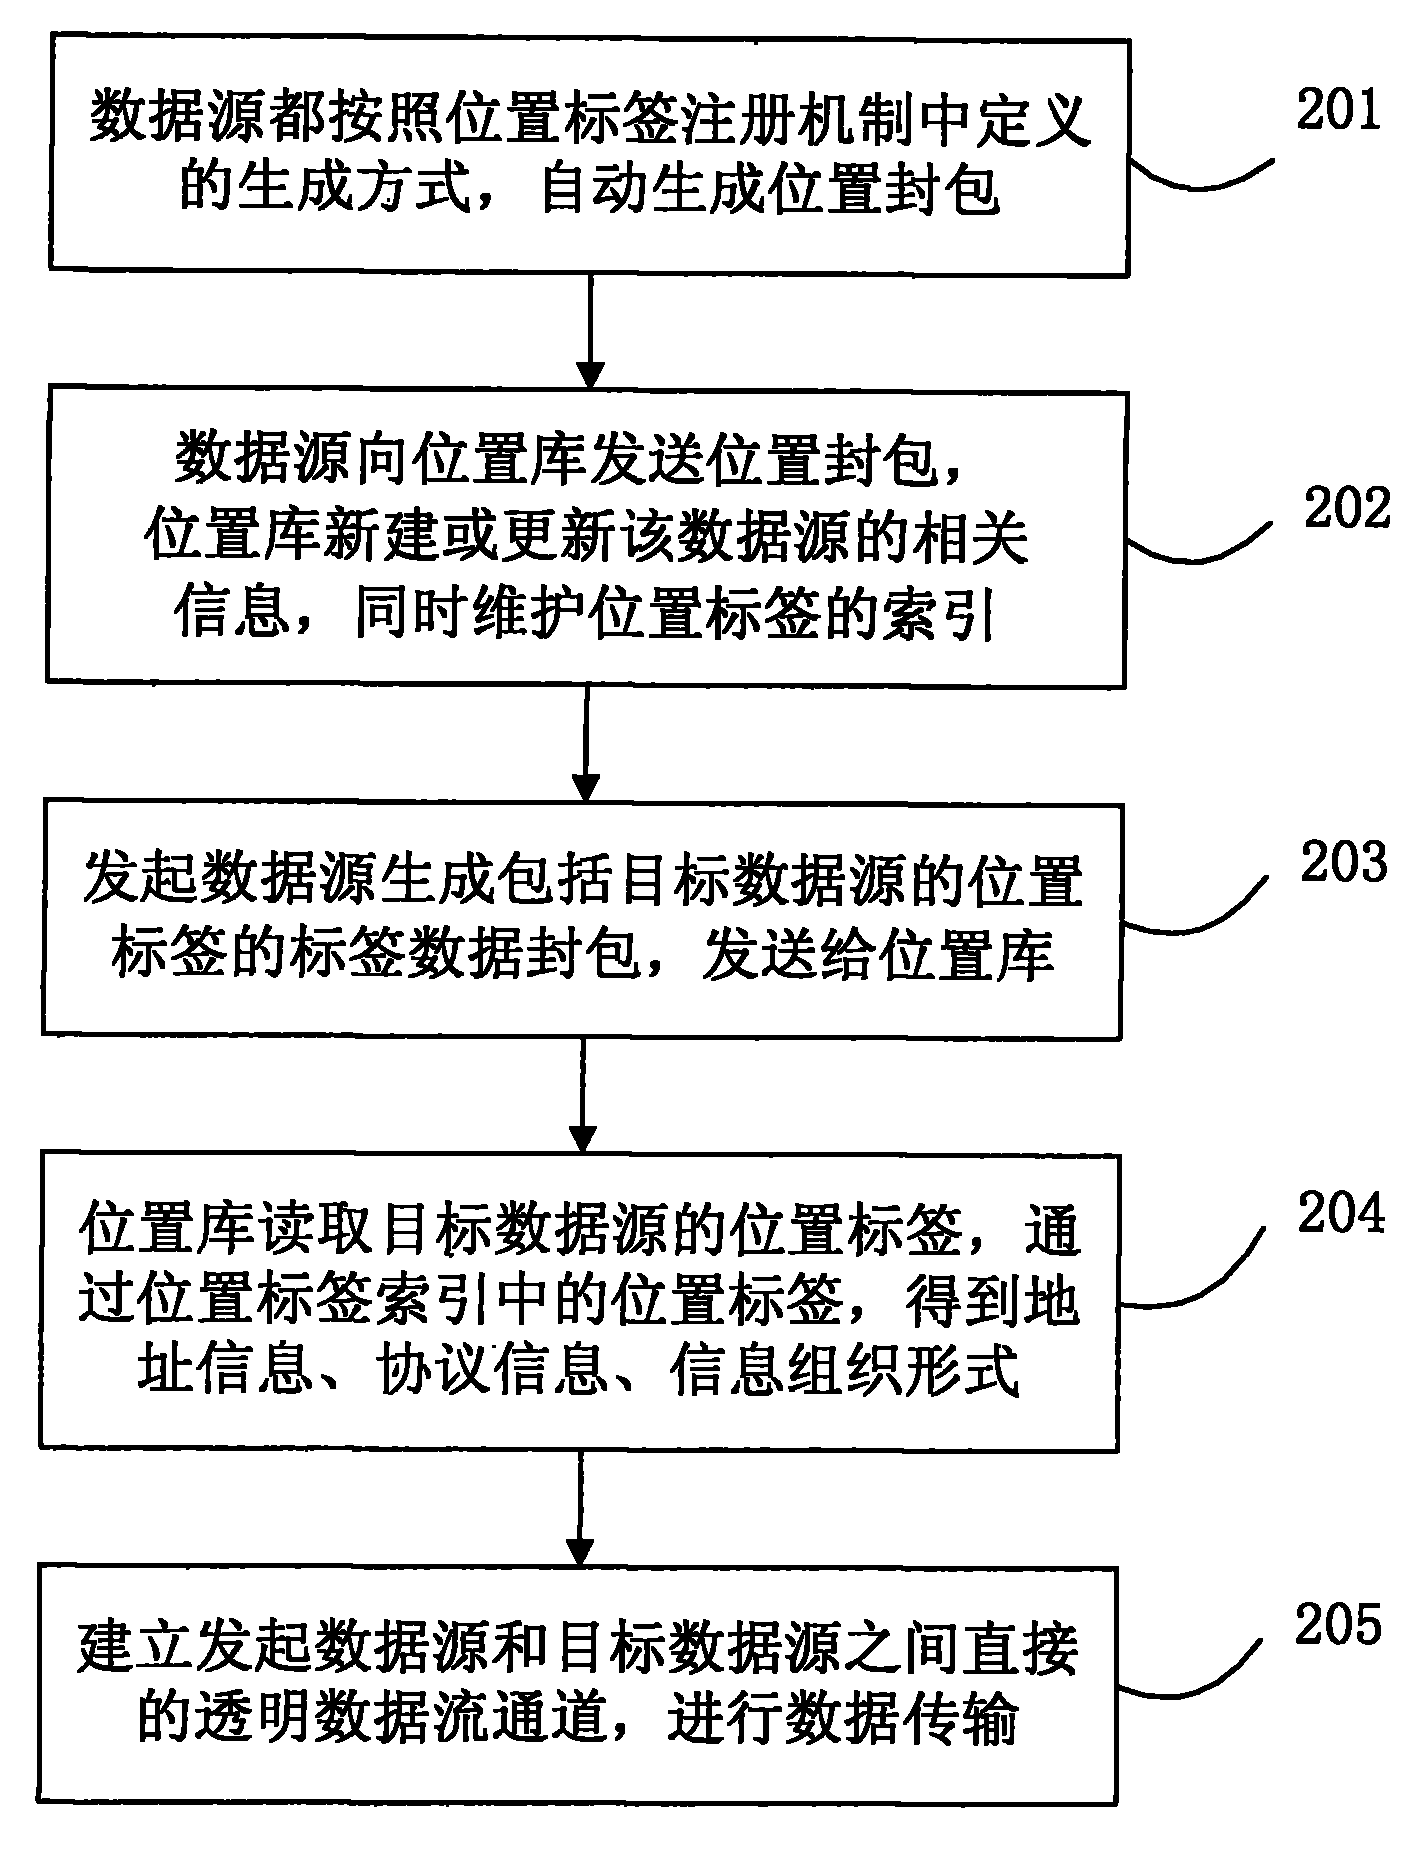 Method and system for transmitting data between heterogeneous different networks